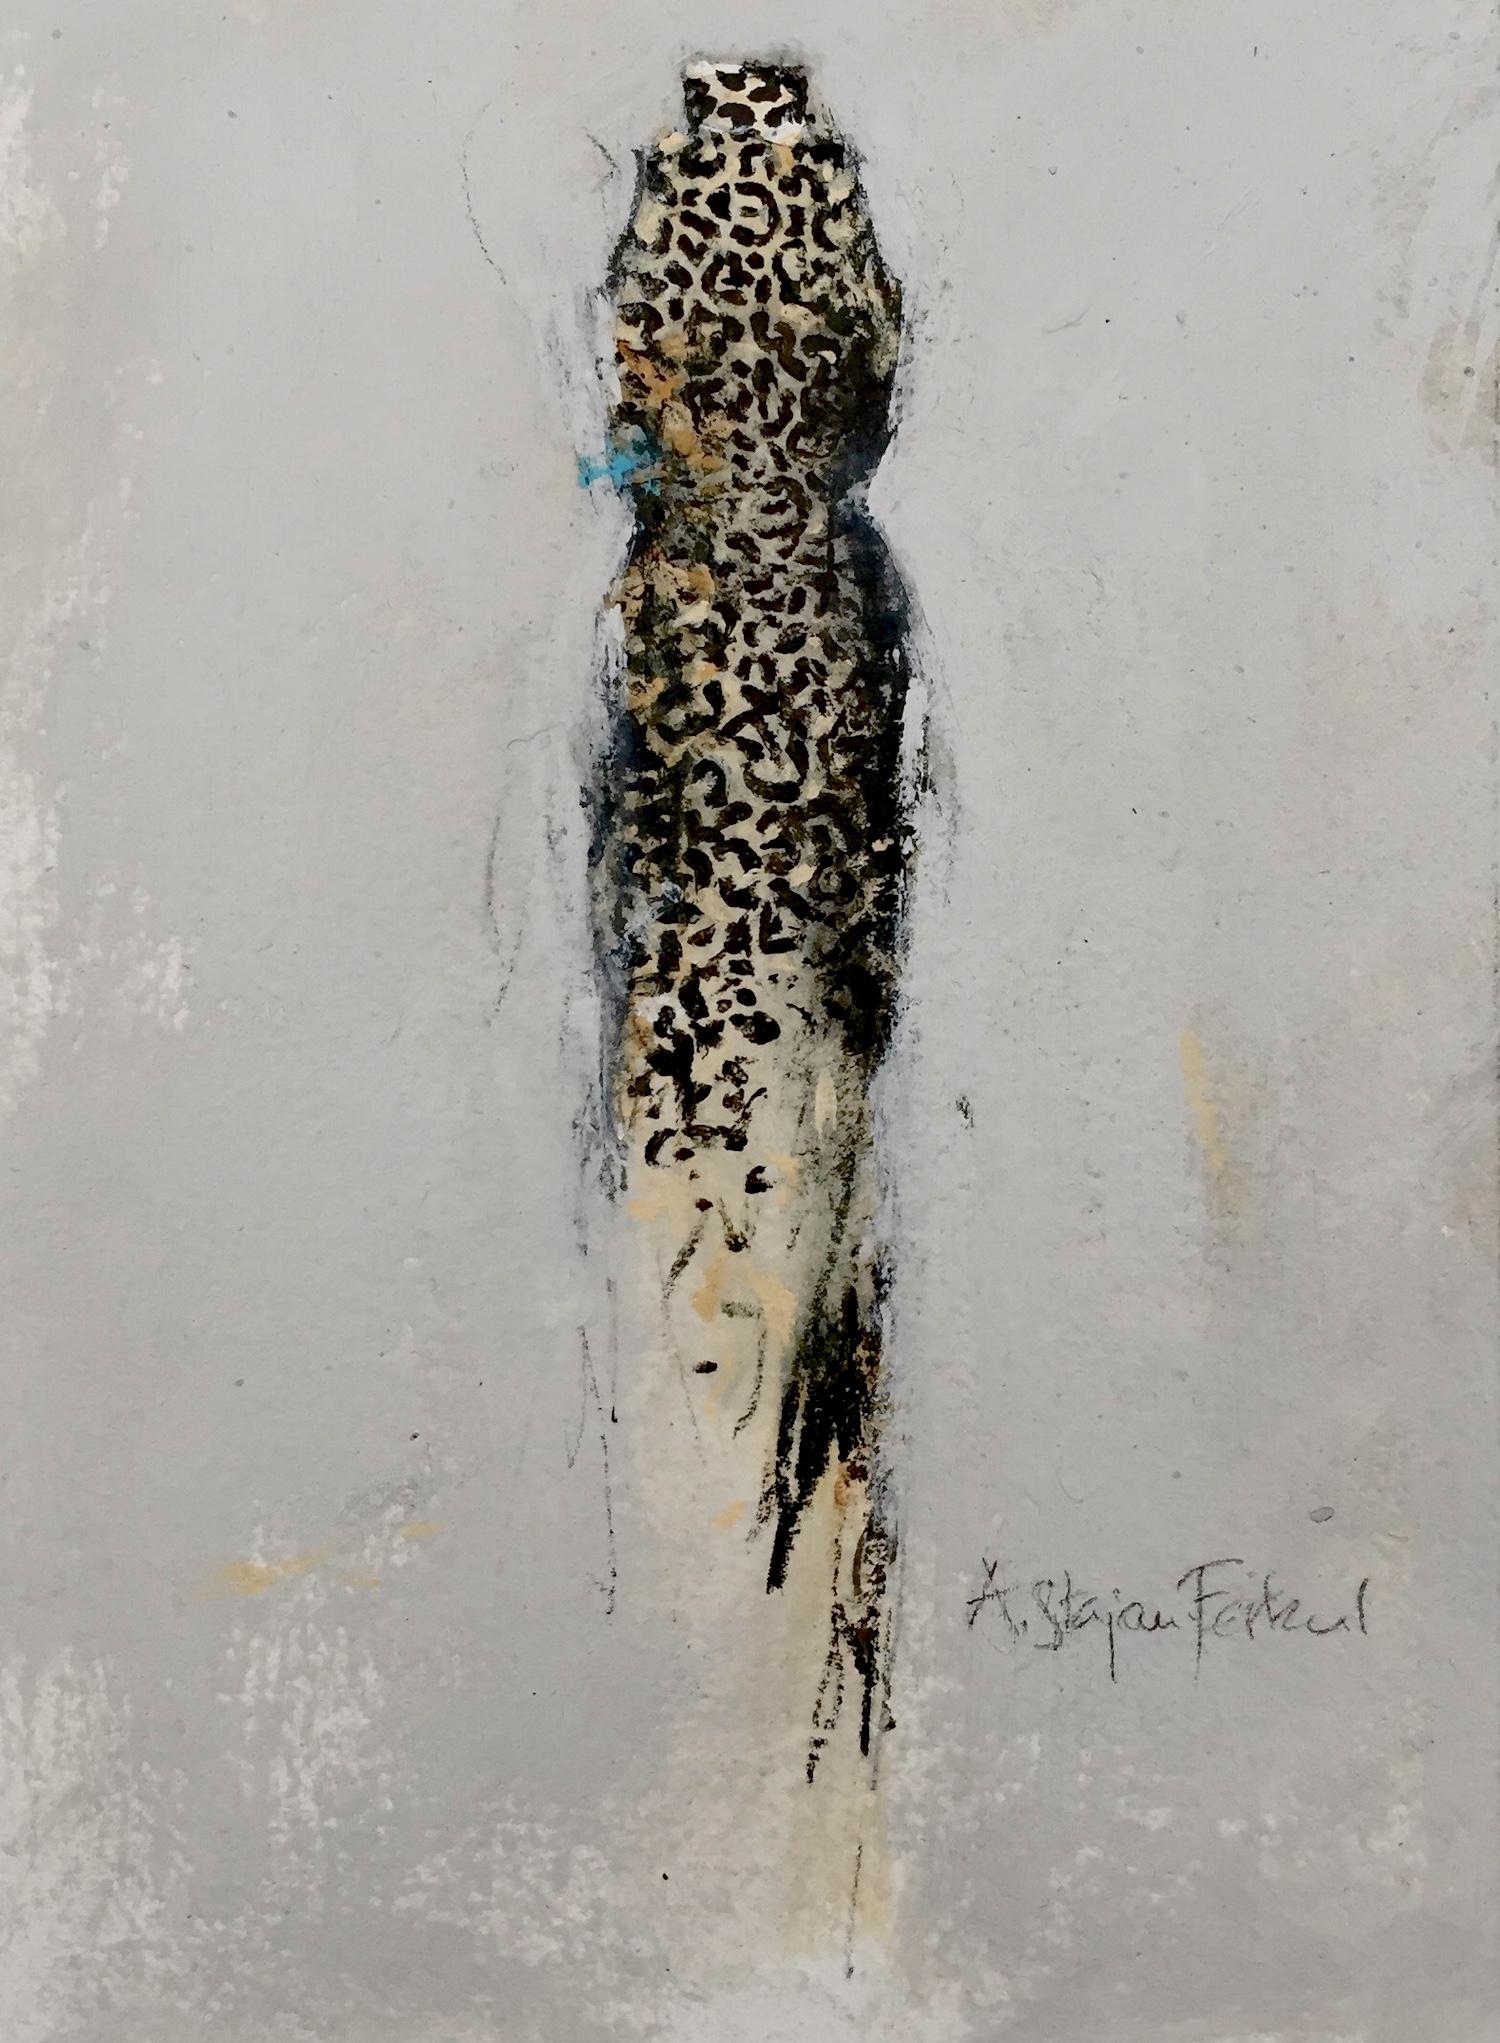 The Dressing Room #4, 5"x7", Artwork On Paper, Leopard Print Dress Painting